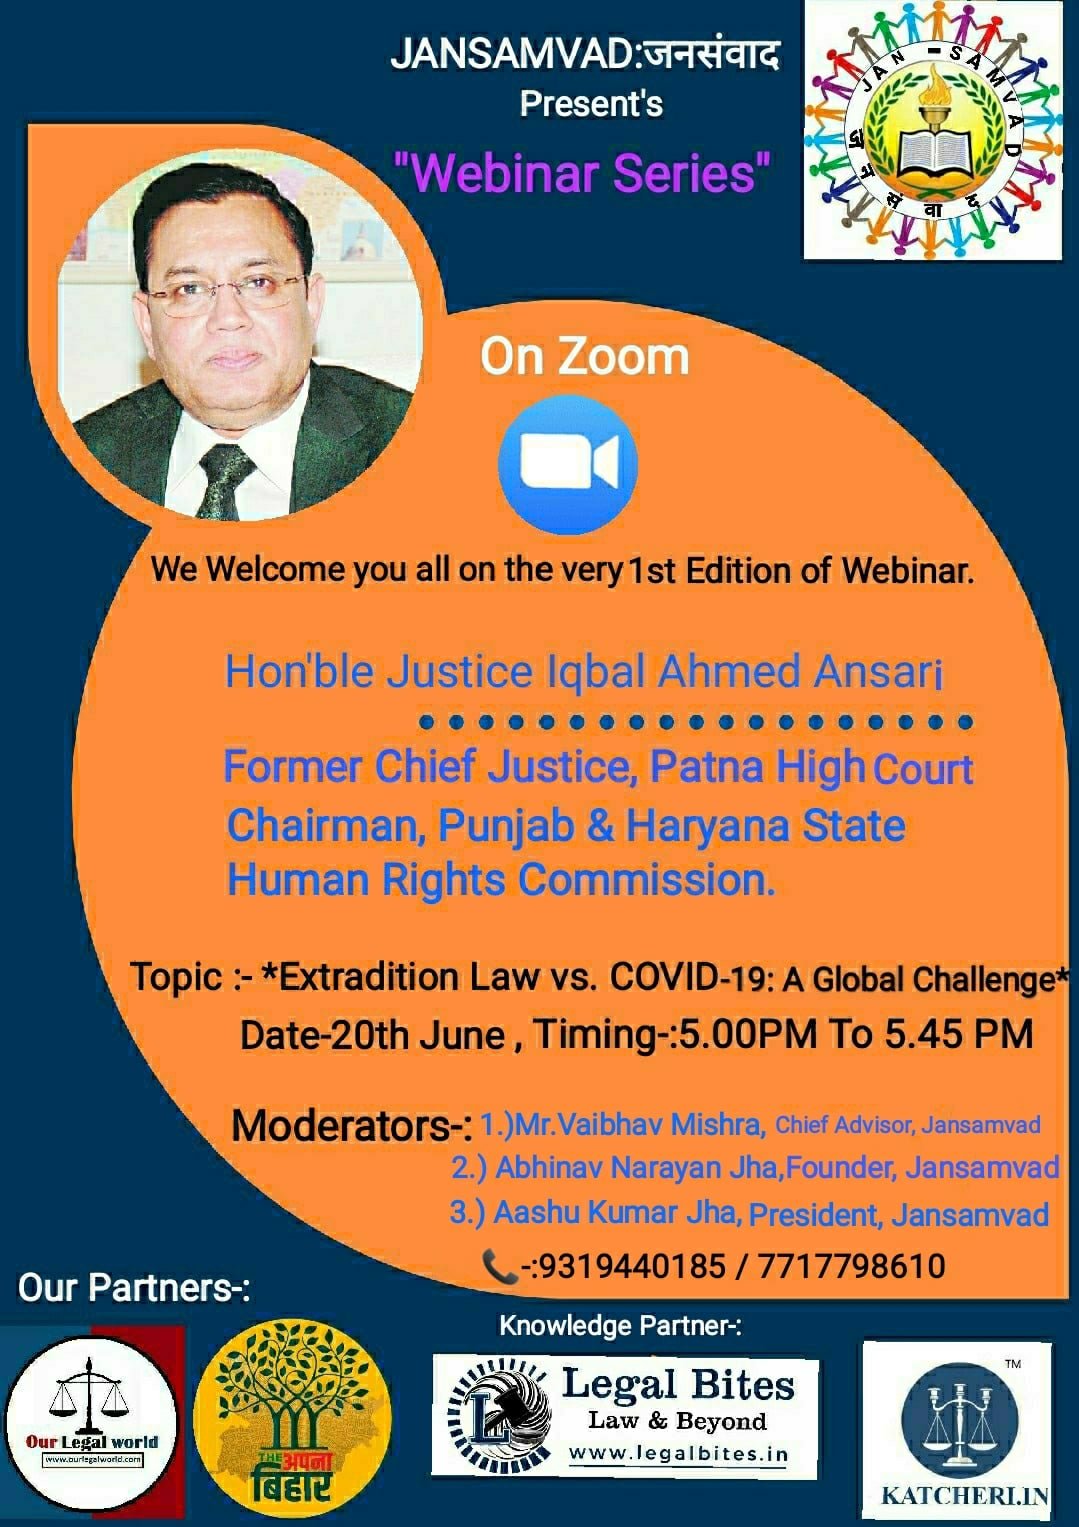 Webinar on Extradition Law Vs. COVID-19: A Global Challenge by JanSamvad Justice Iqbal Ahmed Ansari